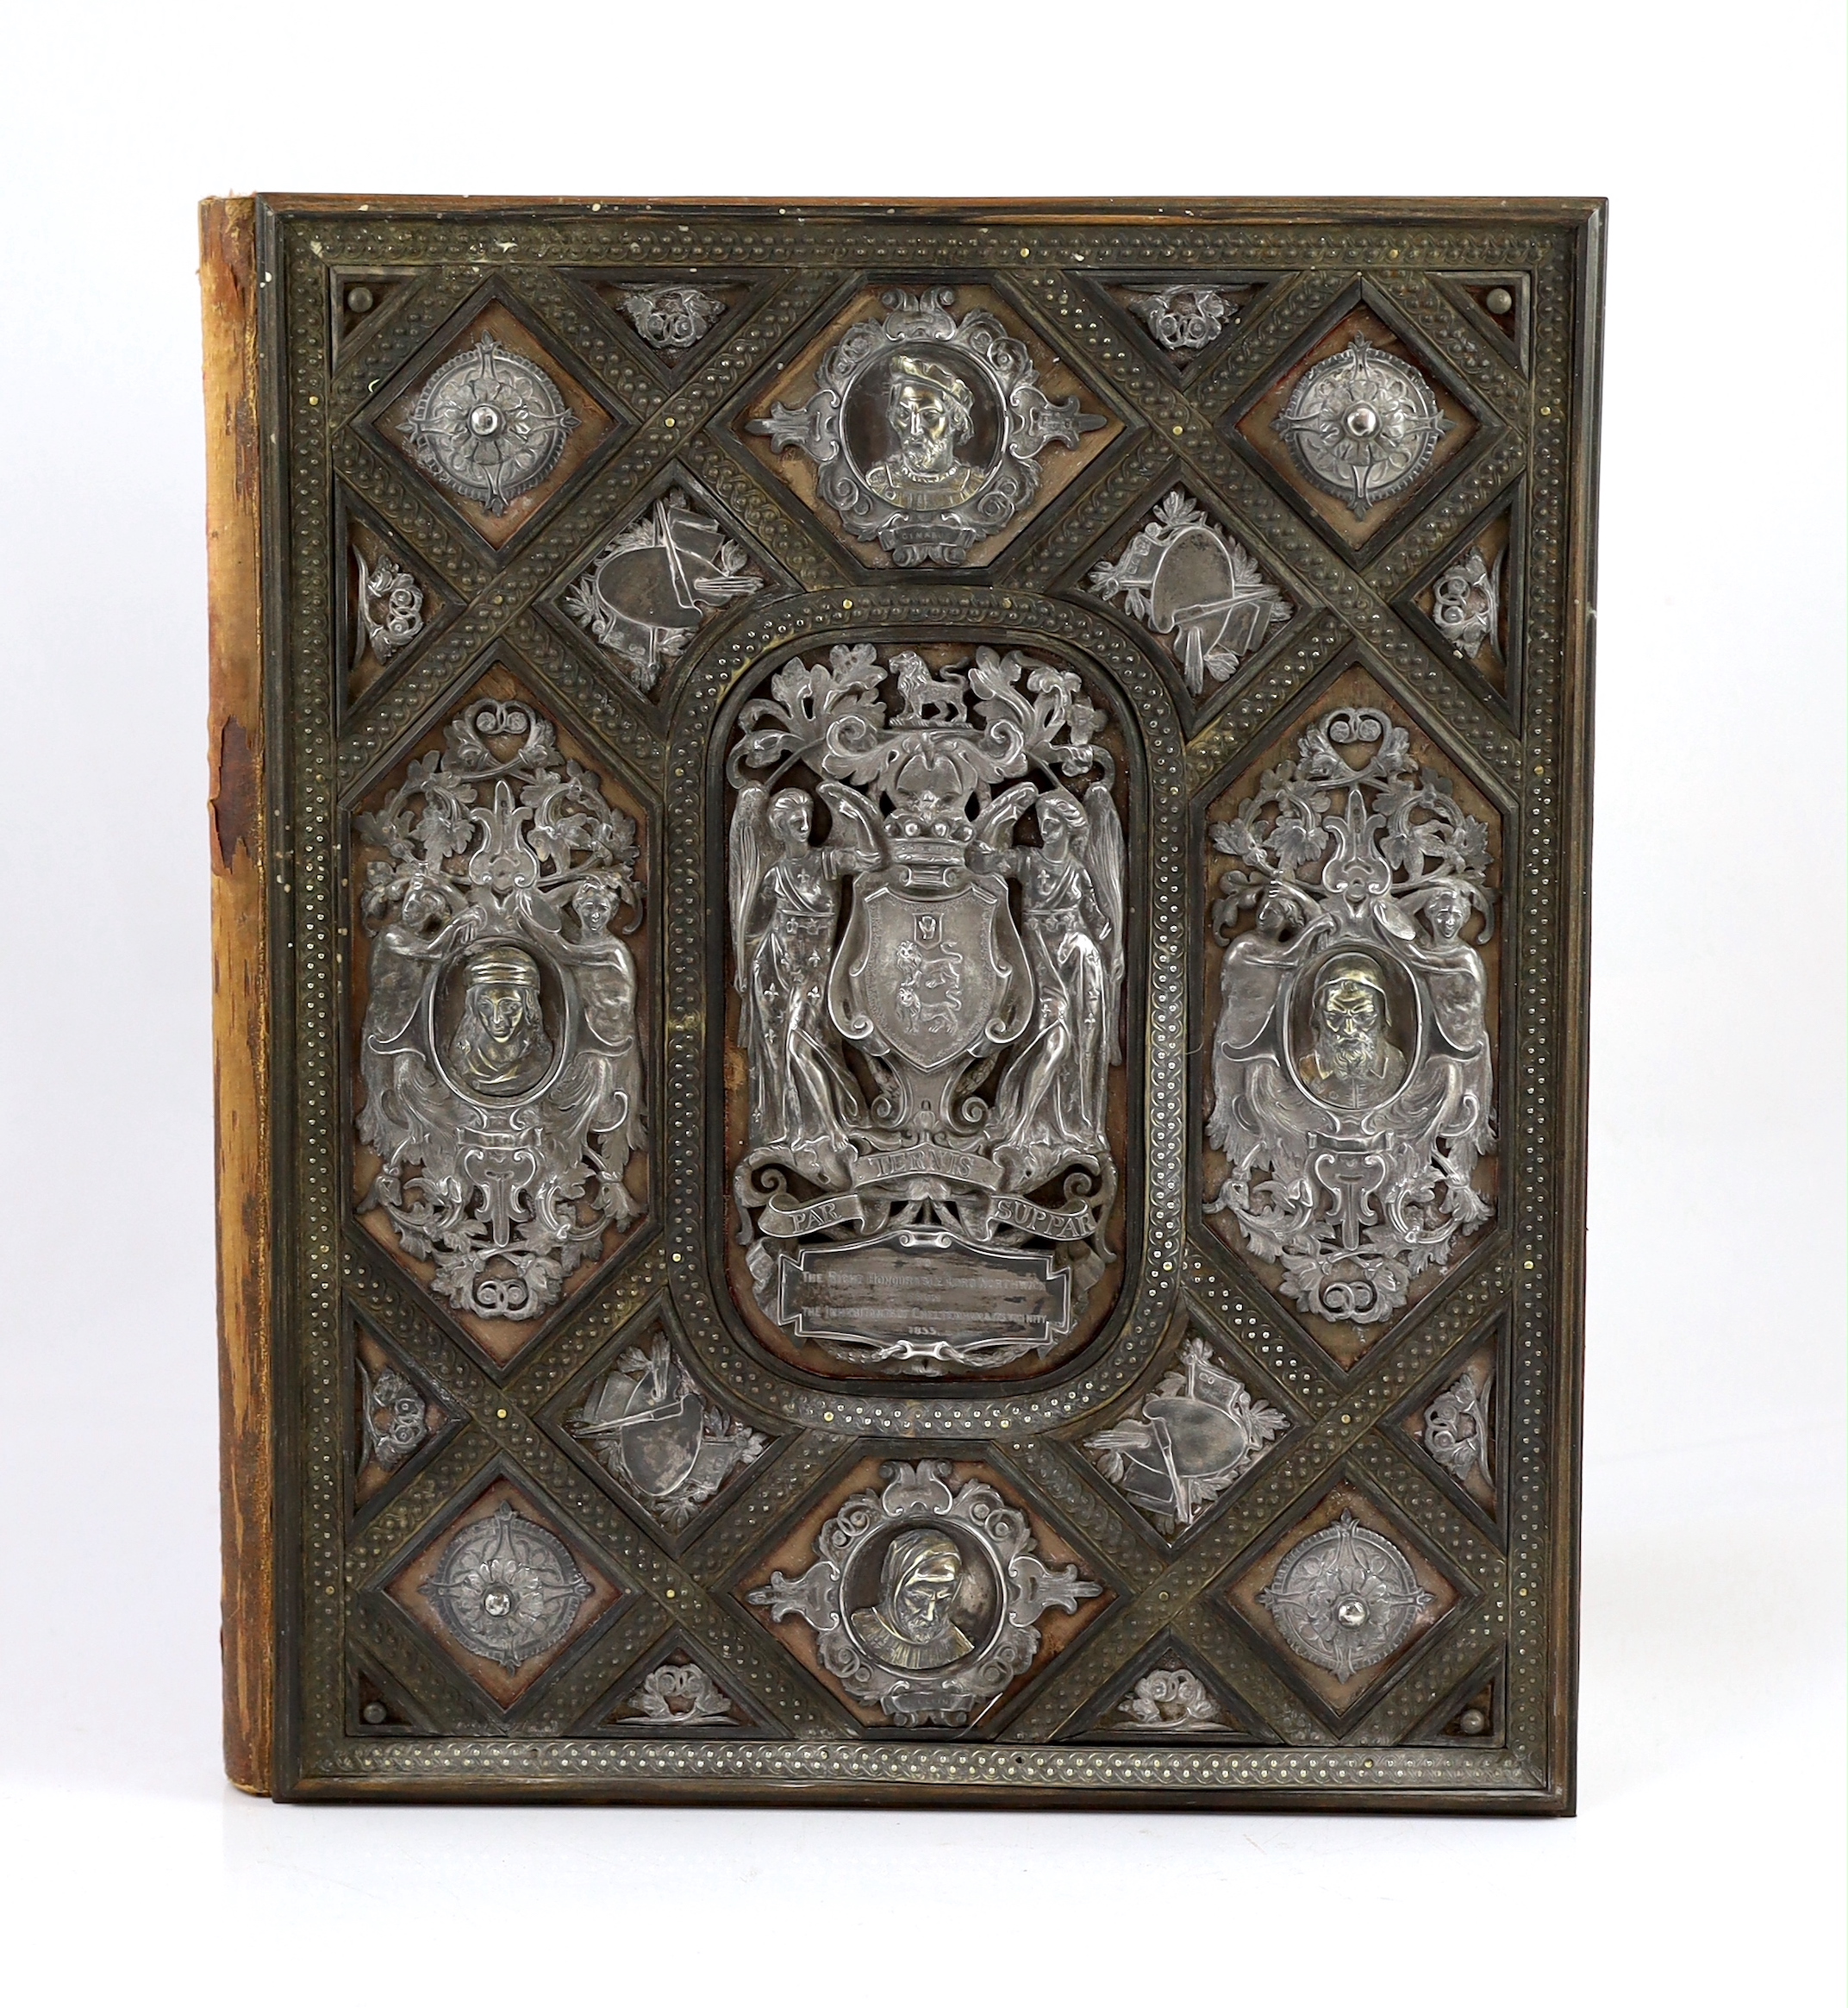 A Victorian silver, parcel gilt and ebony mounted velvet illuminated album, presented to the Right Honourable Lord Northwick in 1855